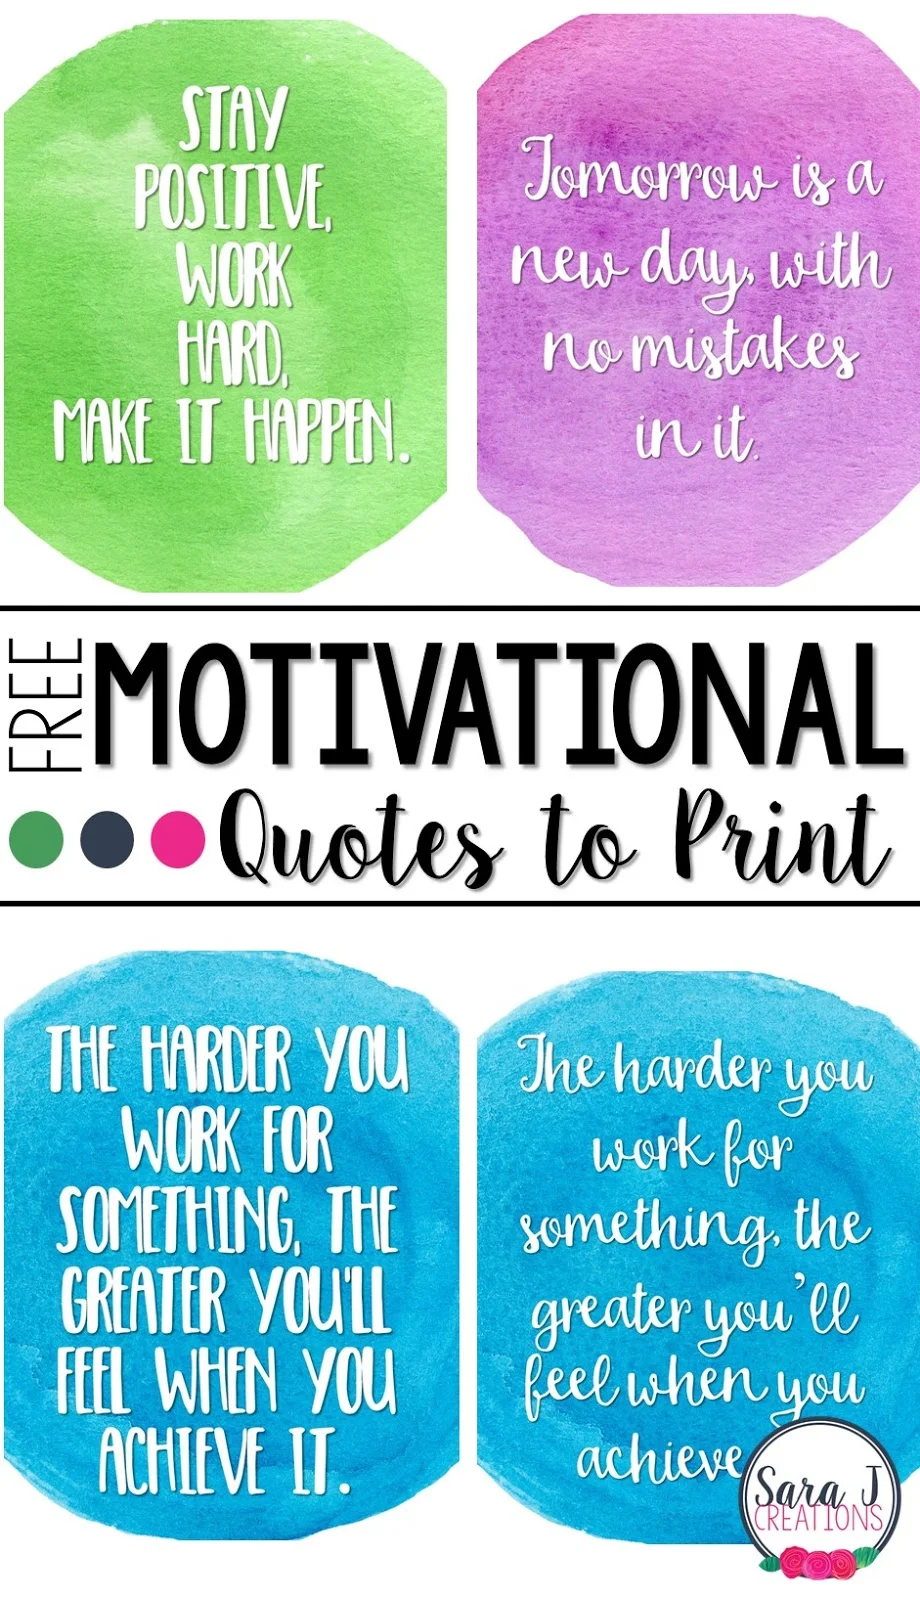 Sometimes you just need some positive motivational quotes to get you going.  Here are 3 free printable quotes for you!